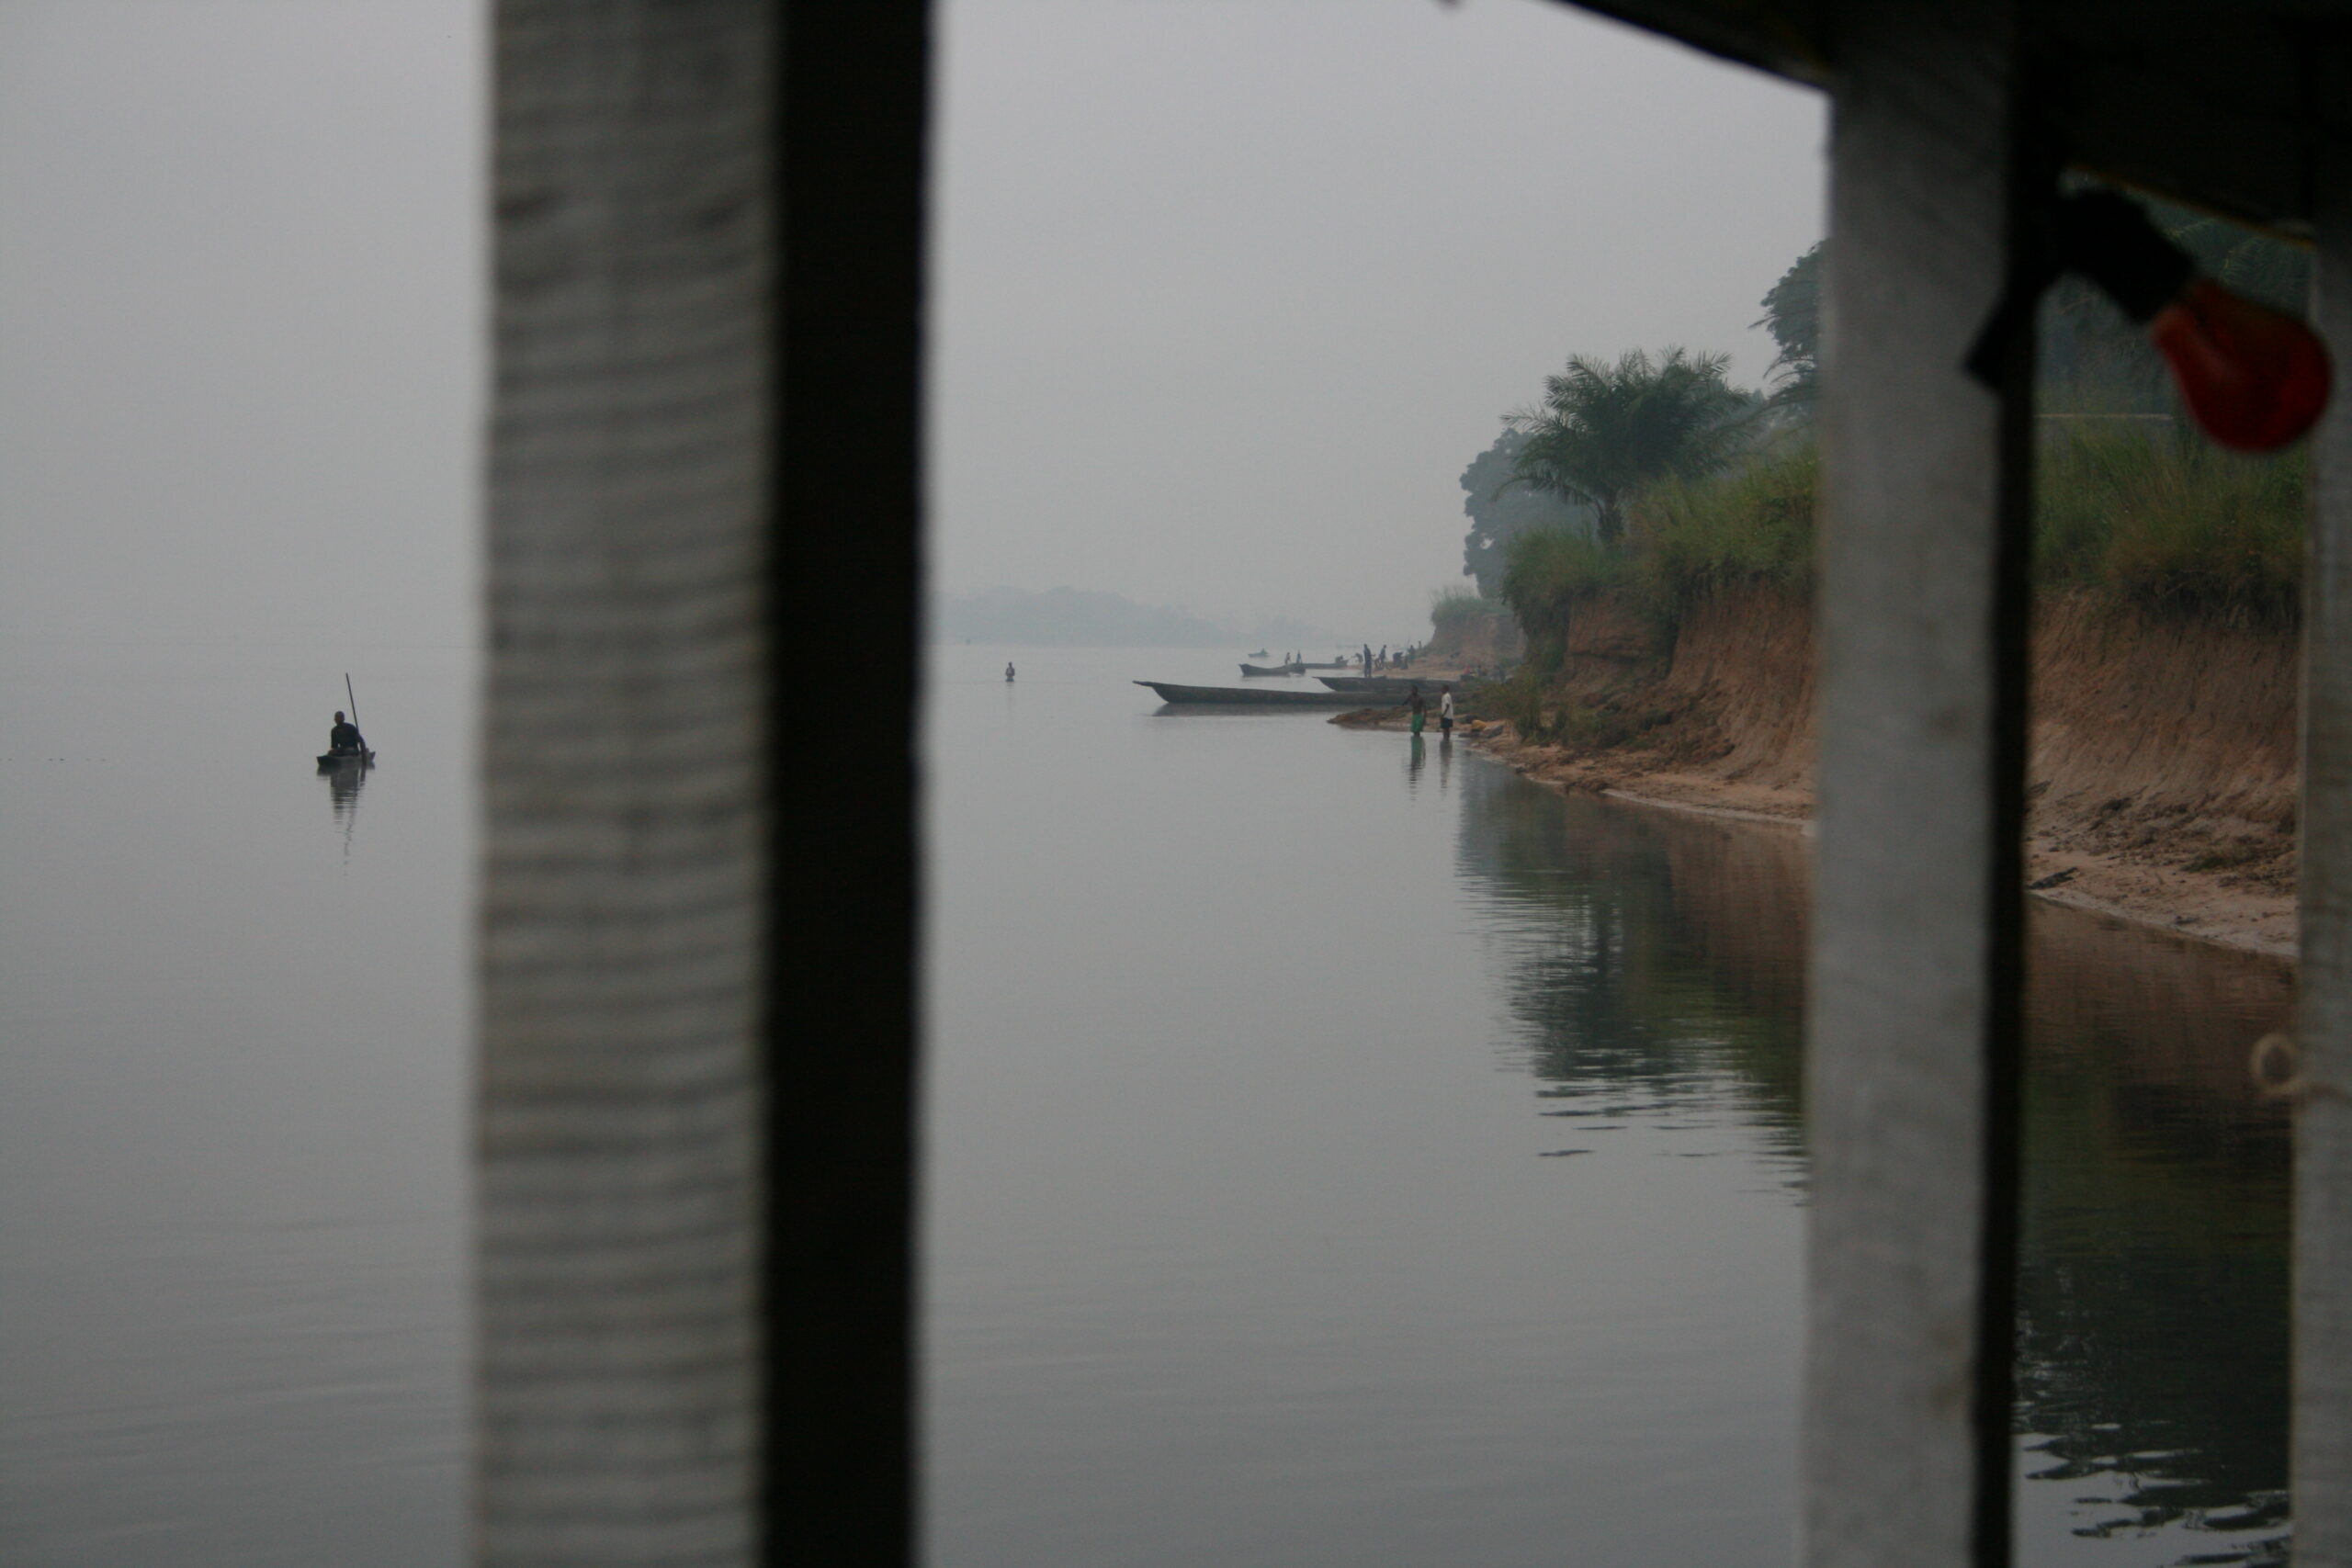 Pirogue, river view from boat near Isangi